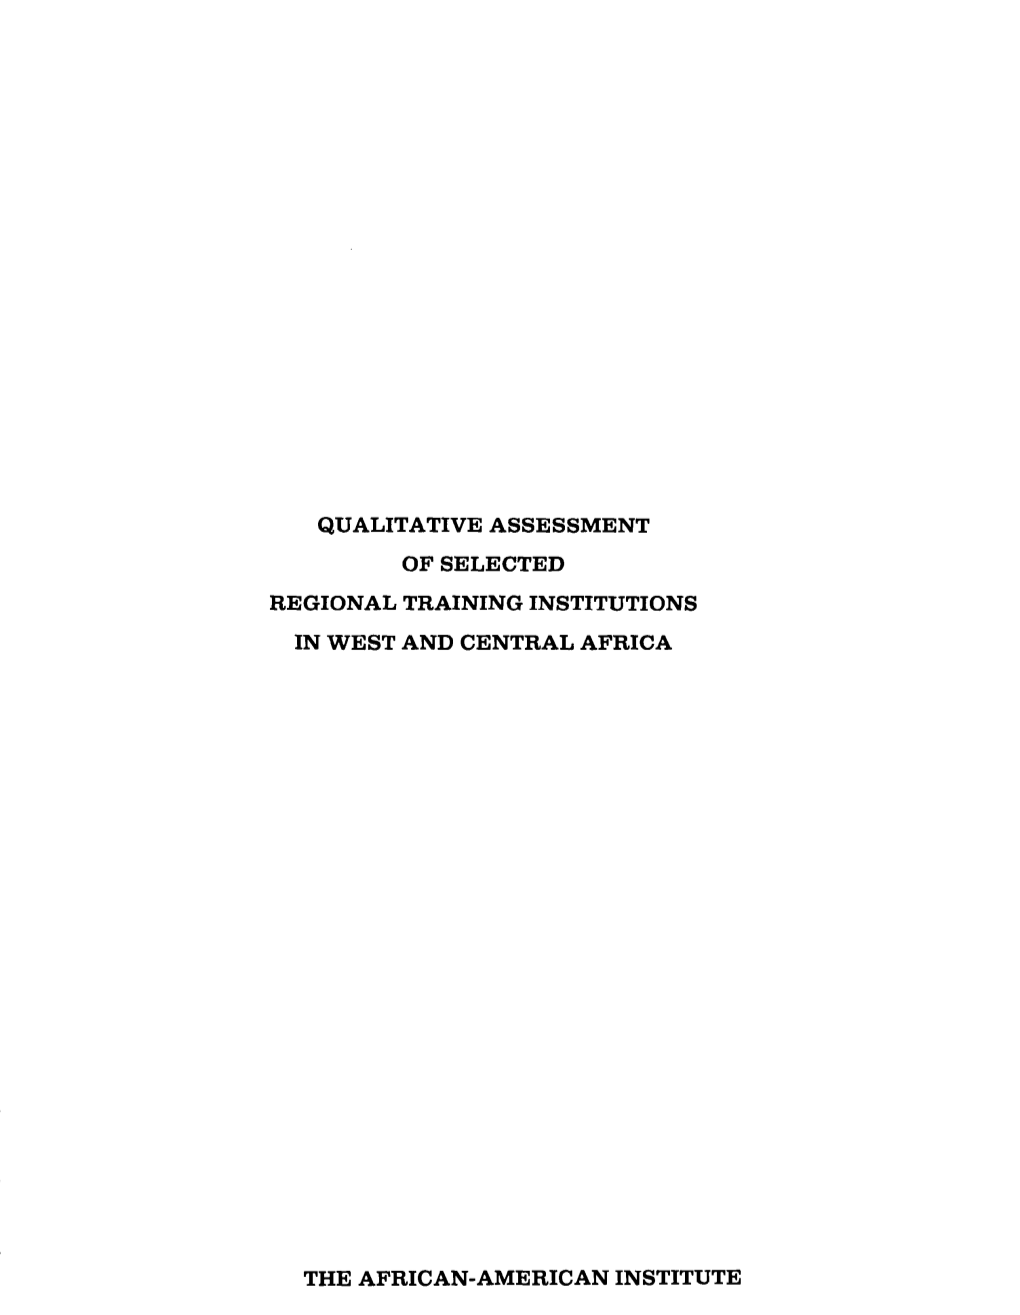 Qualitative Assessment of Selected Regional Training Institutions in West and Central Africa